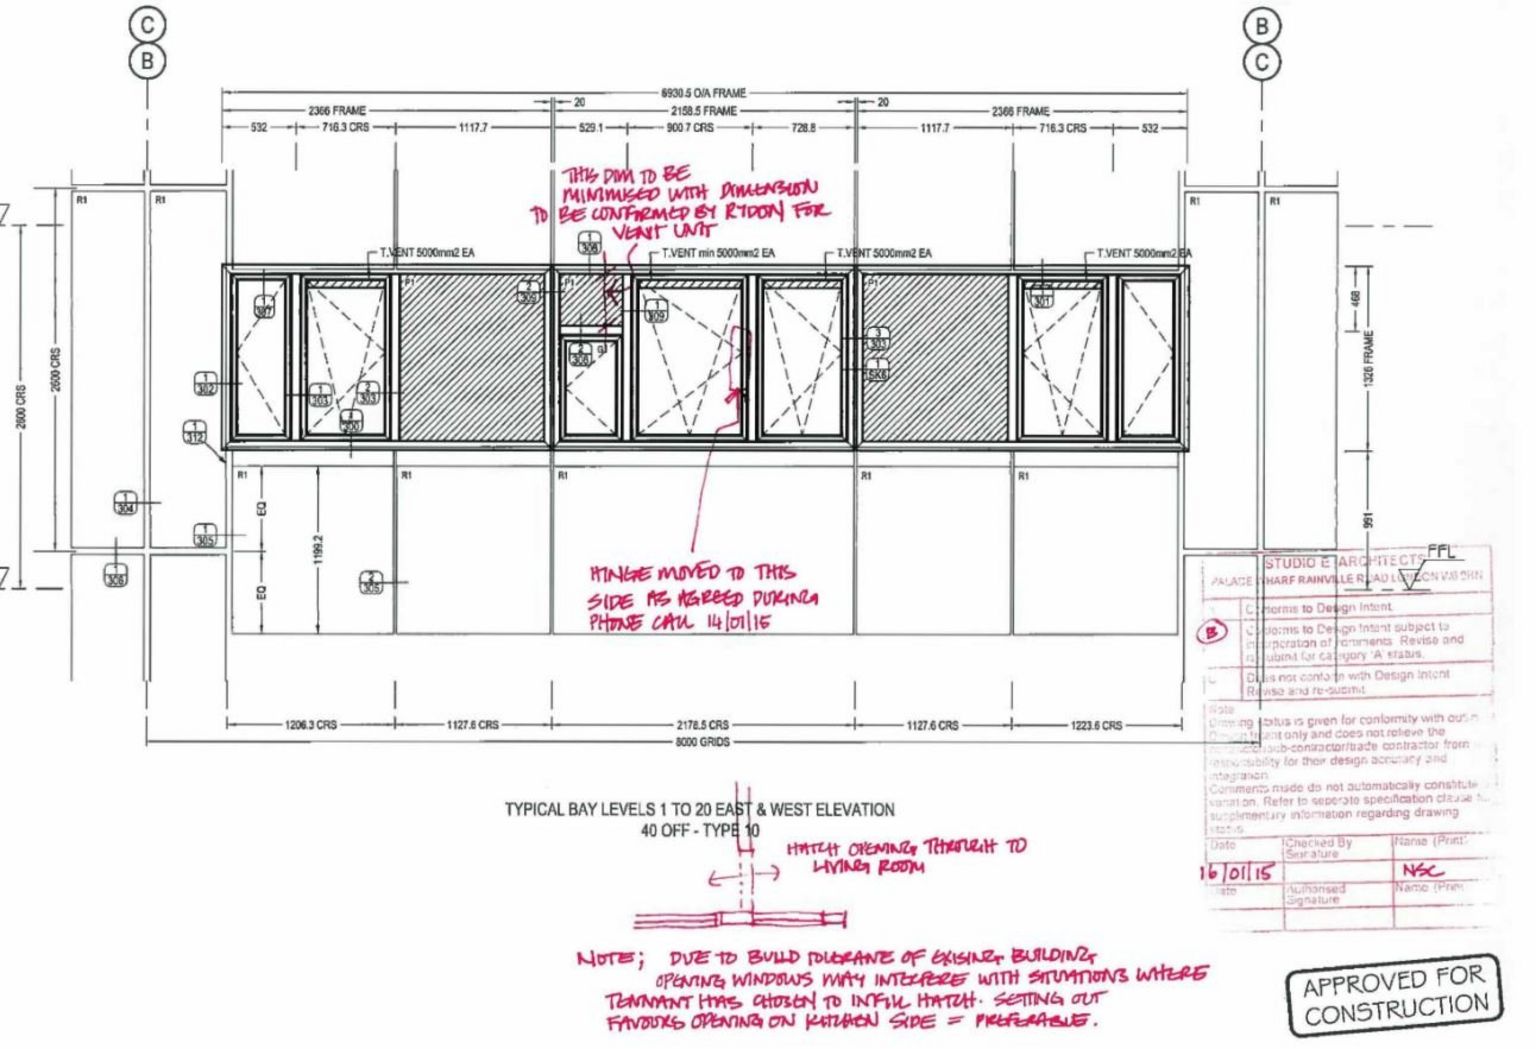 Plan showing window layout and architect's comments